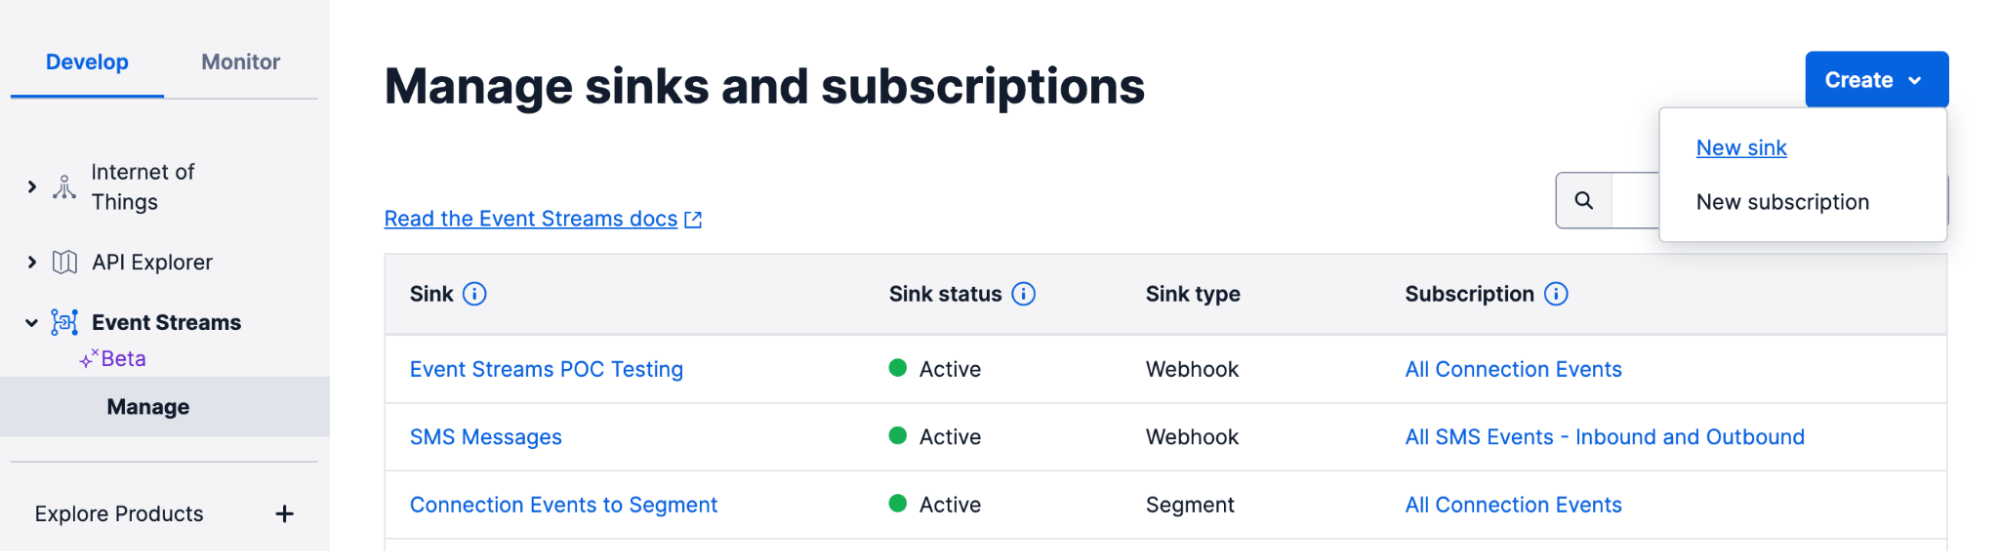 Manage sinks and subscriptions